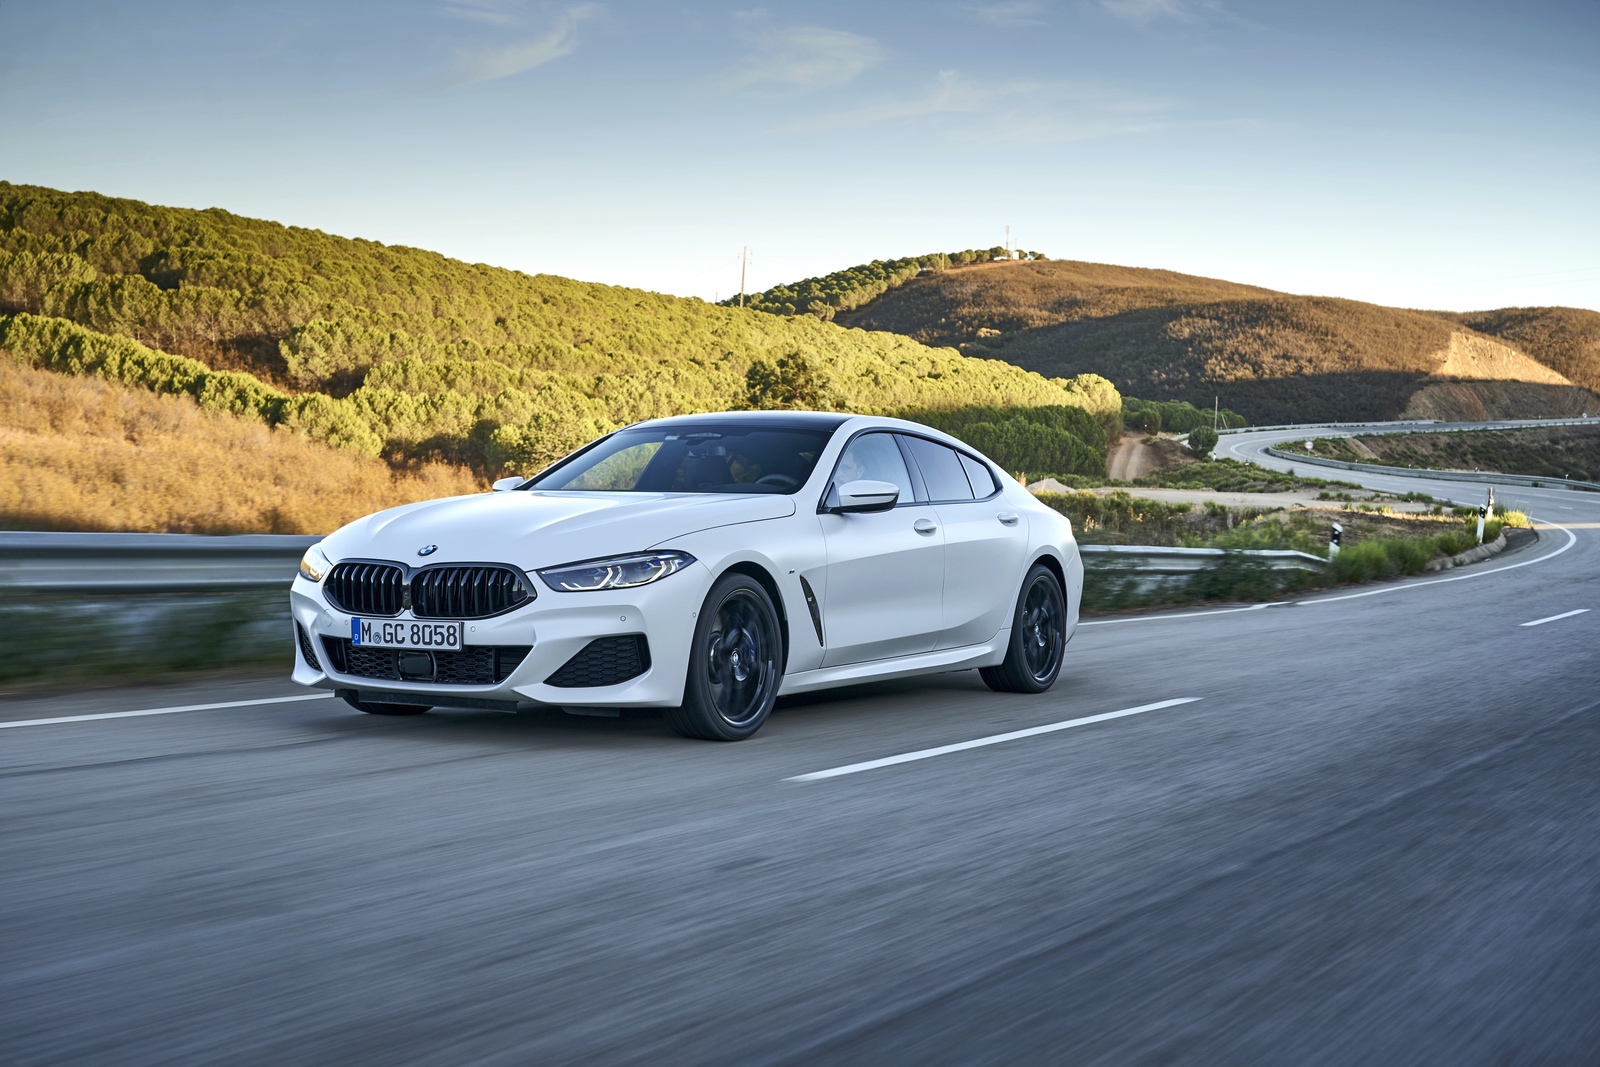 REVIEW: 2020 BMW 840i Gran Coupe - Practical and Stylish